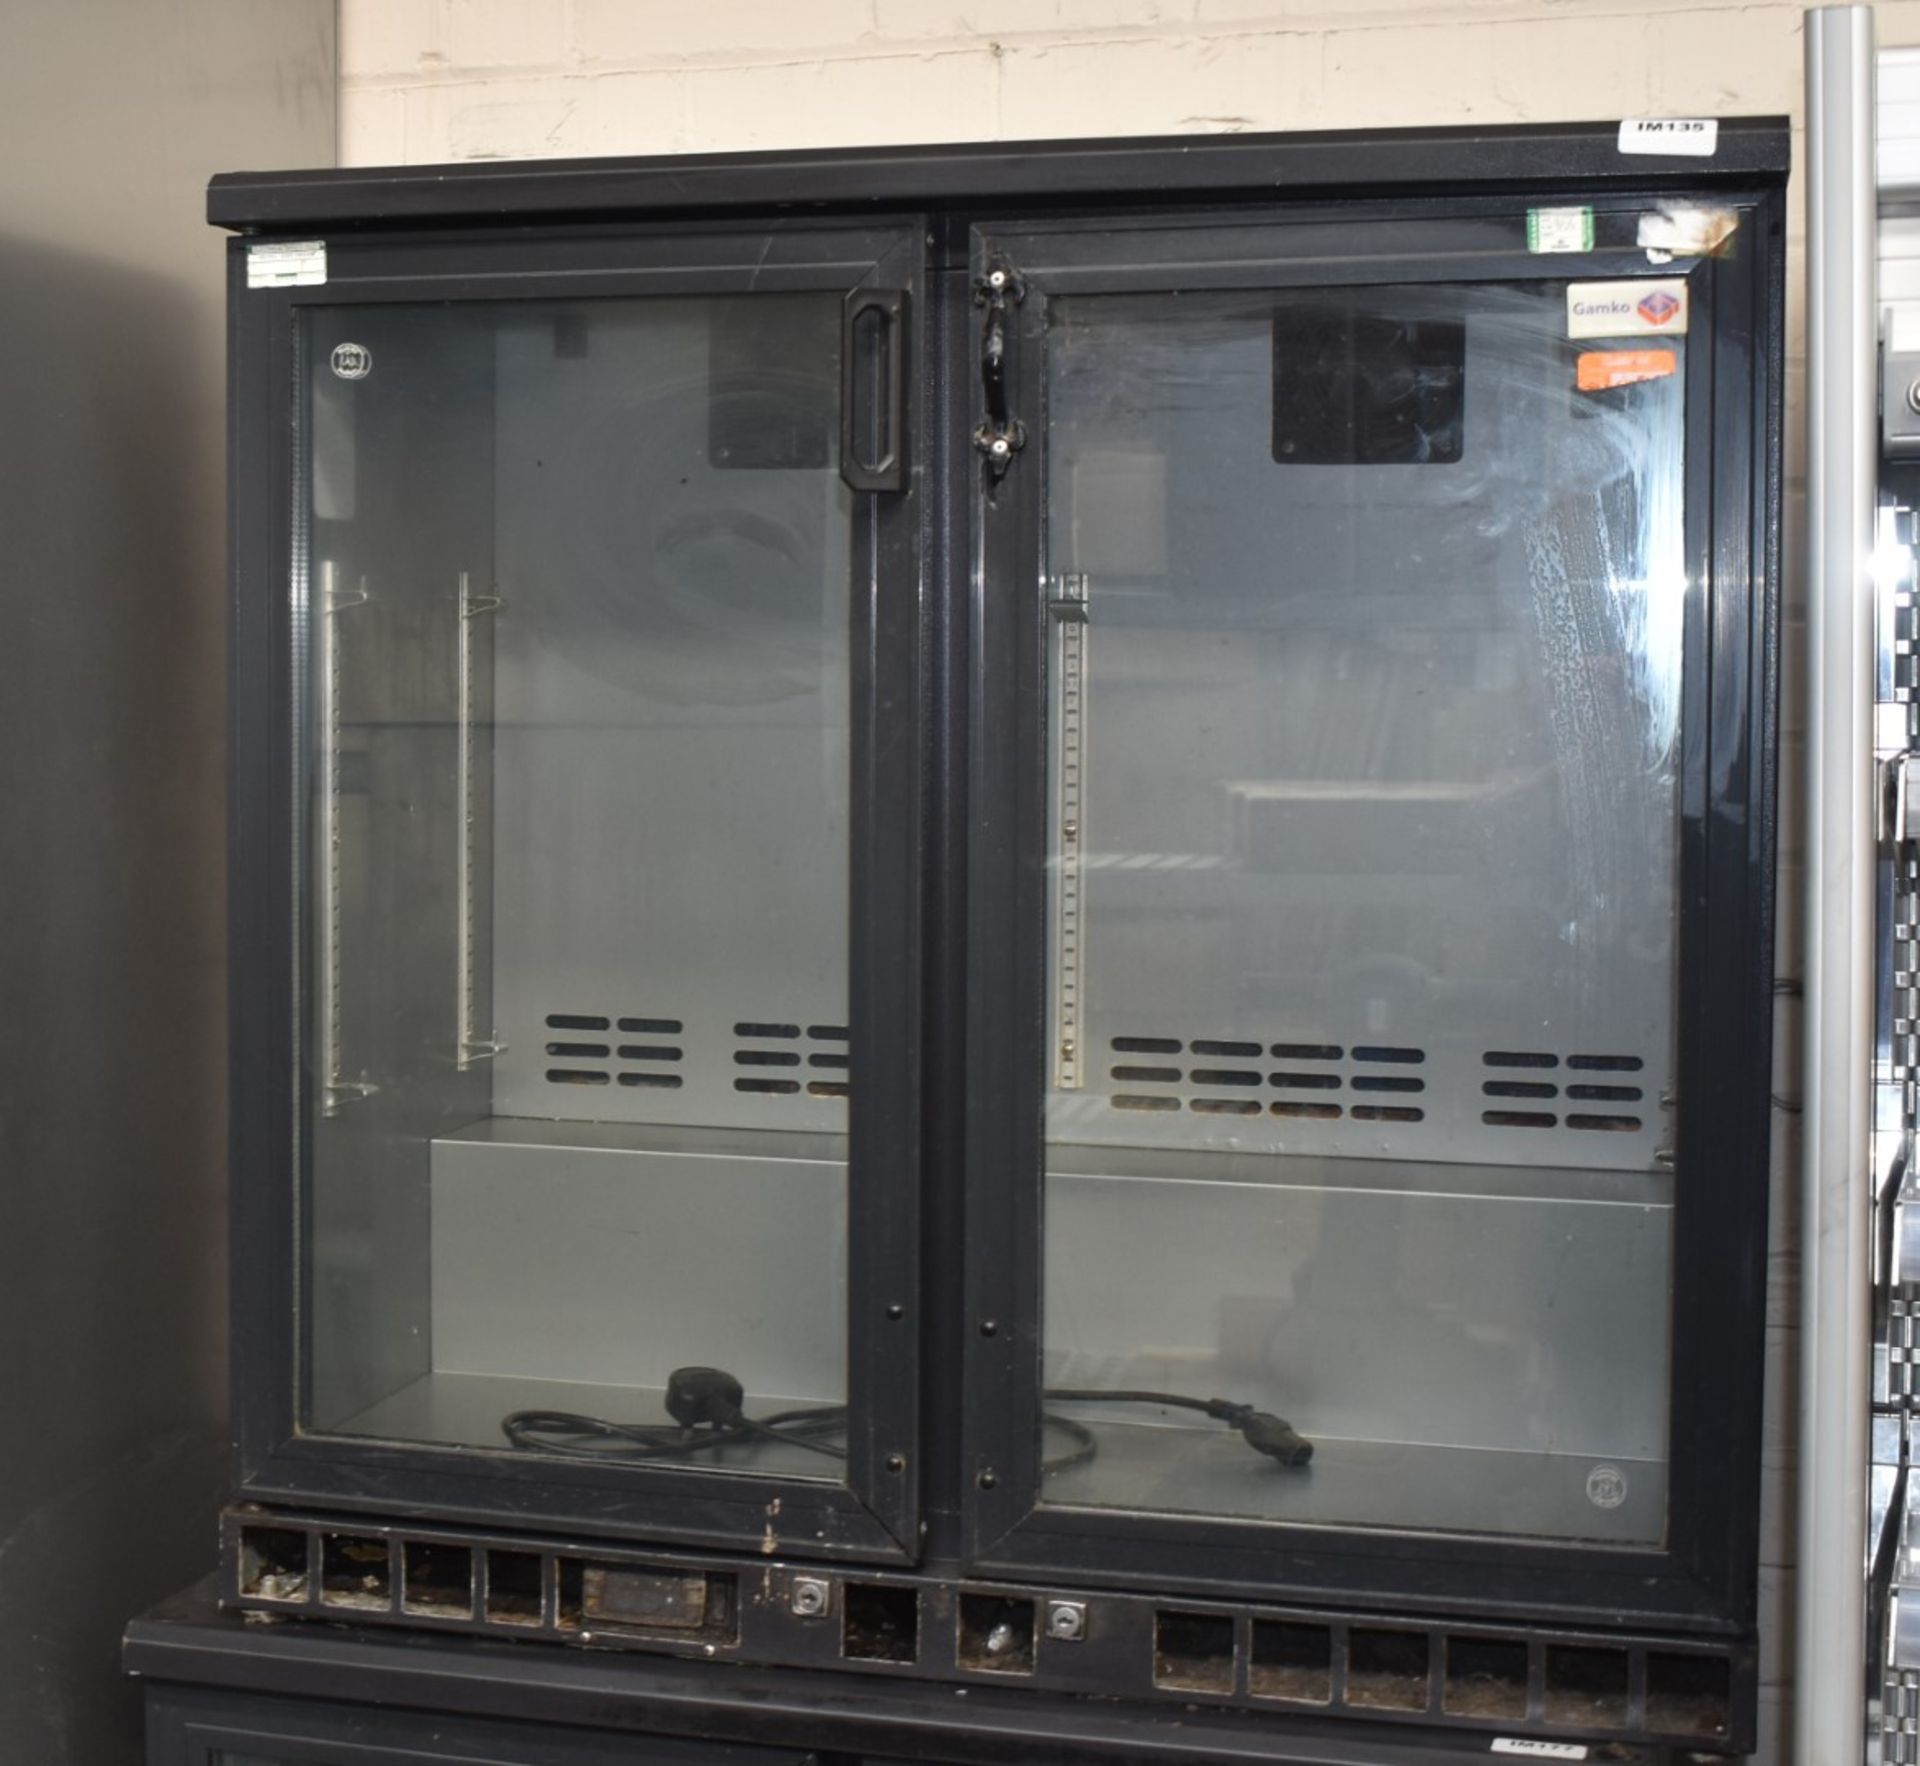 2 x Gamko MG250G  Two Door 90cm Wide Backbar Bottle Coolers - Recently Removed From Restaurant - Image 3 of 5